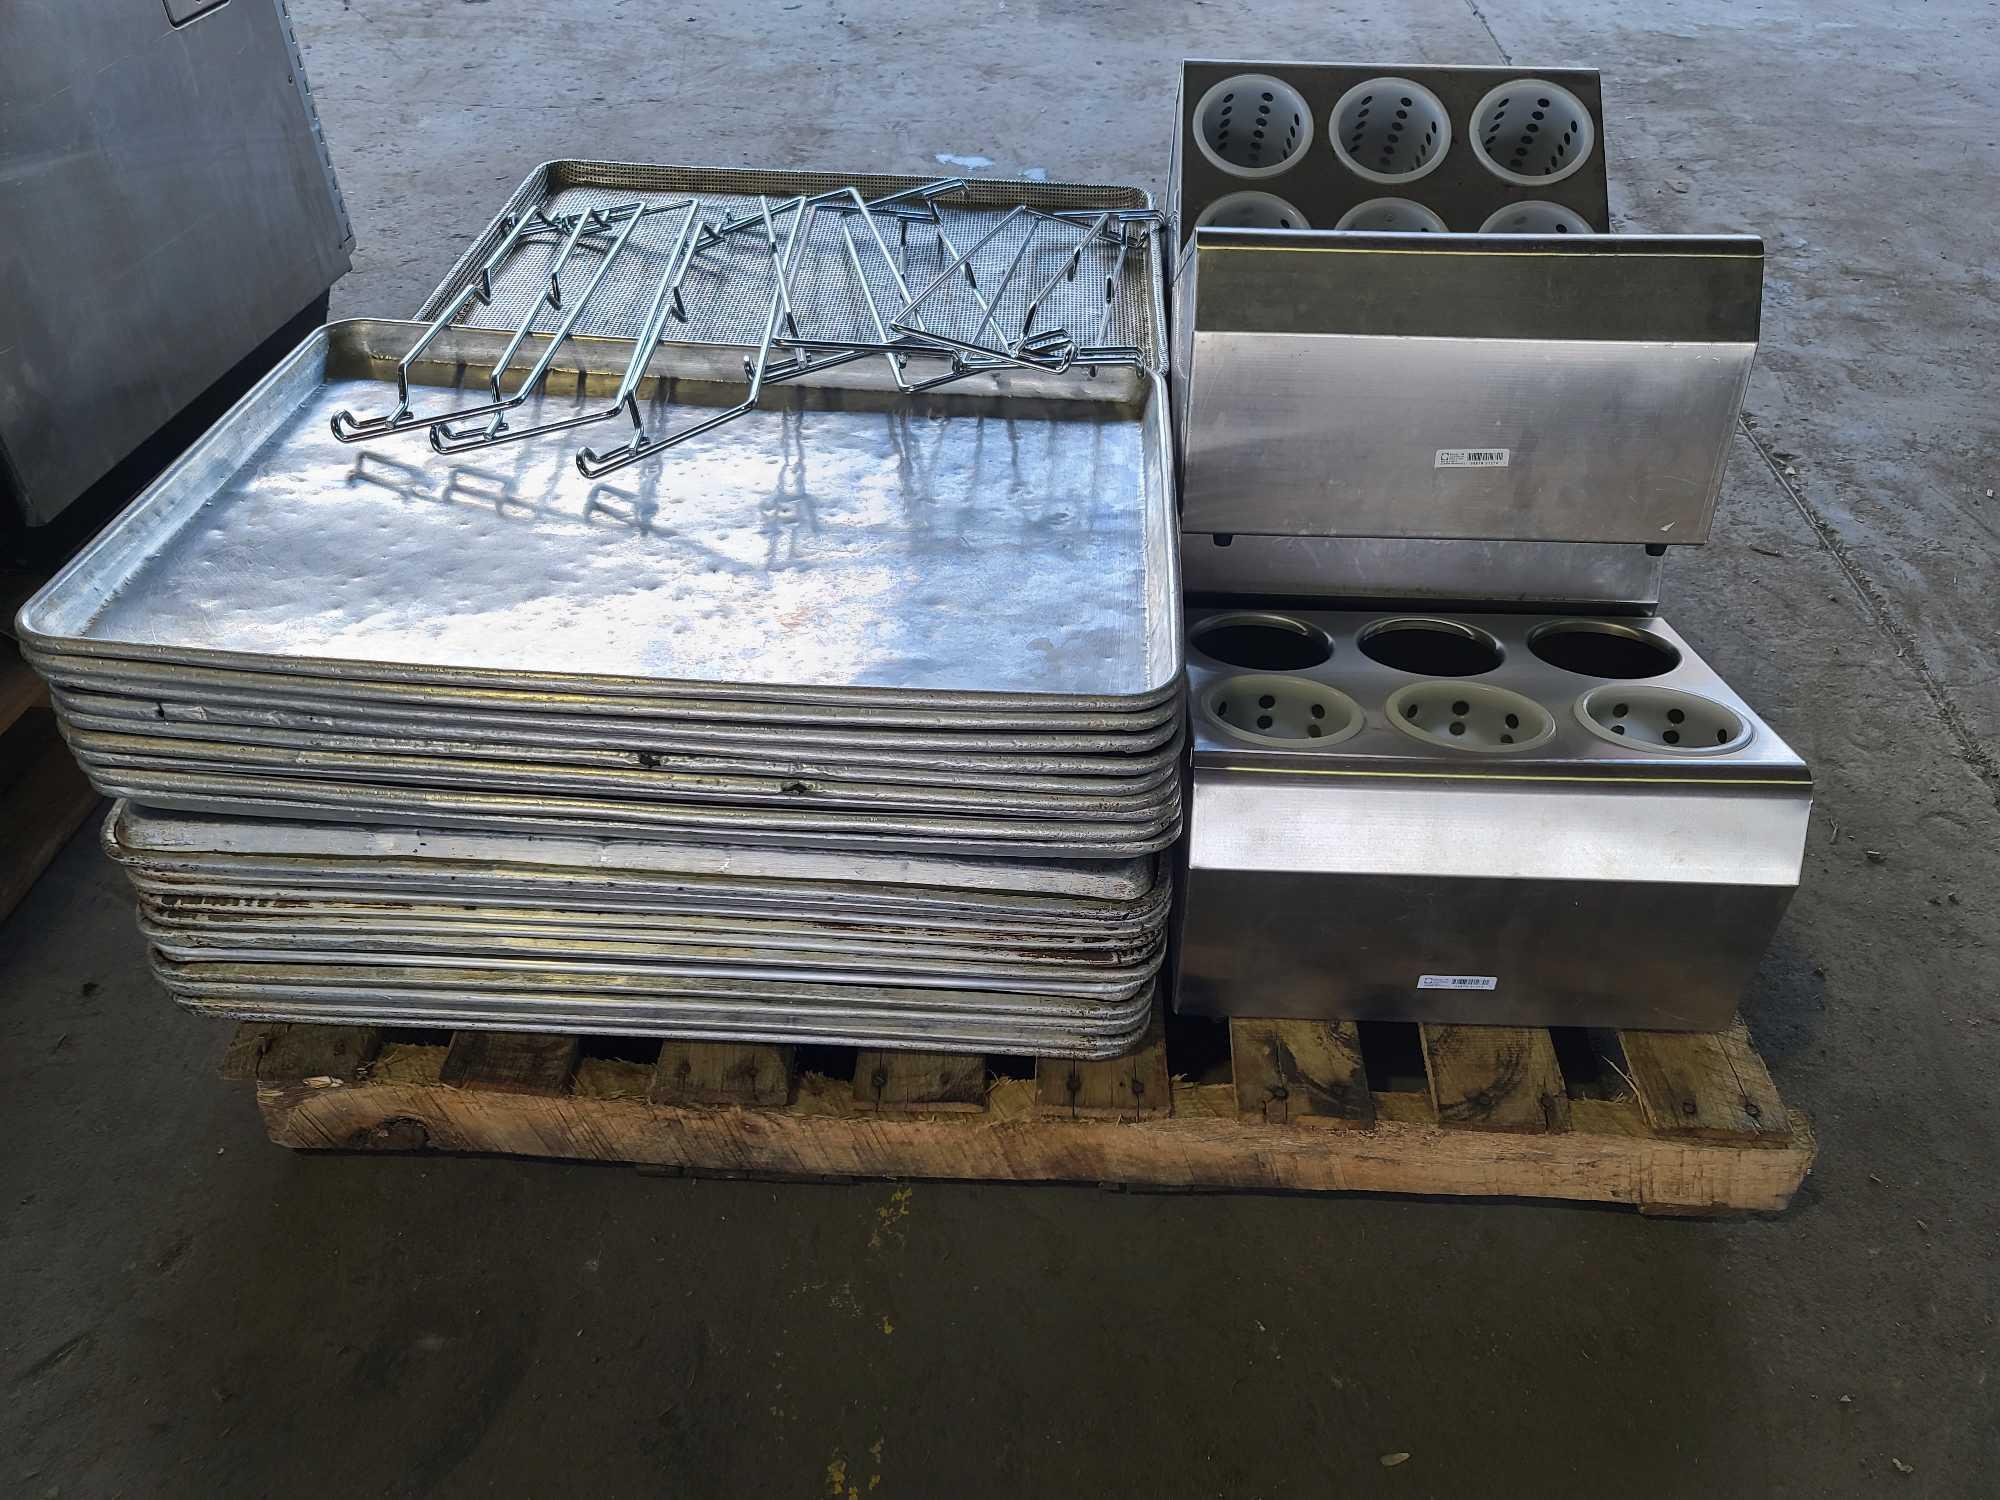 Group of Cup Holders, Group of Metal Oven Trays, Group of Misc. Rack Wires